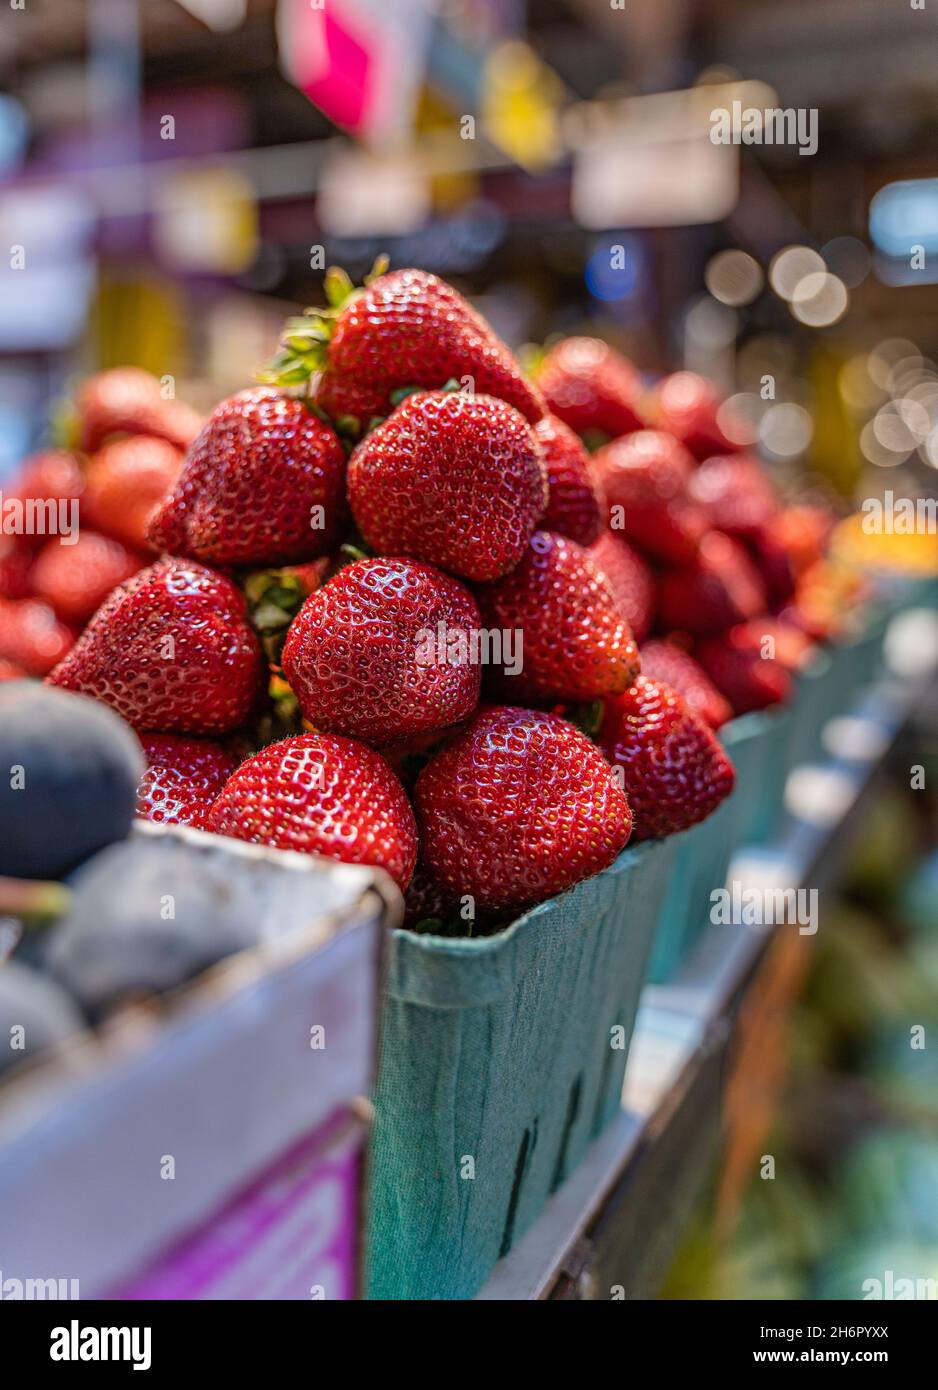 Vertical closeup shot of a bunch of giant delicious strawberries at a market Stock Photo